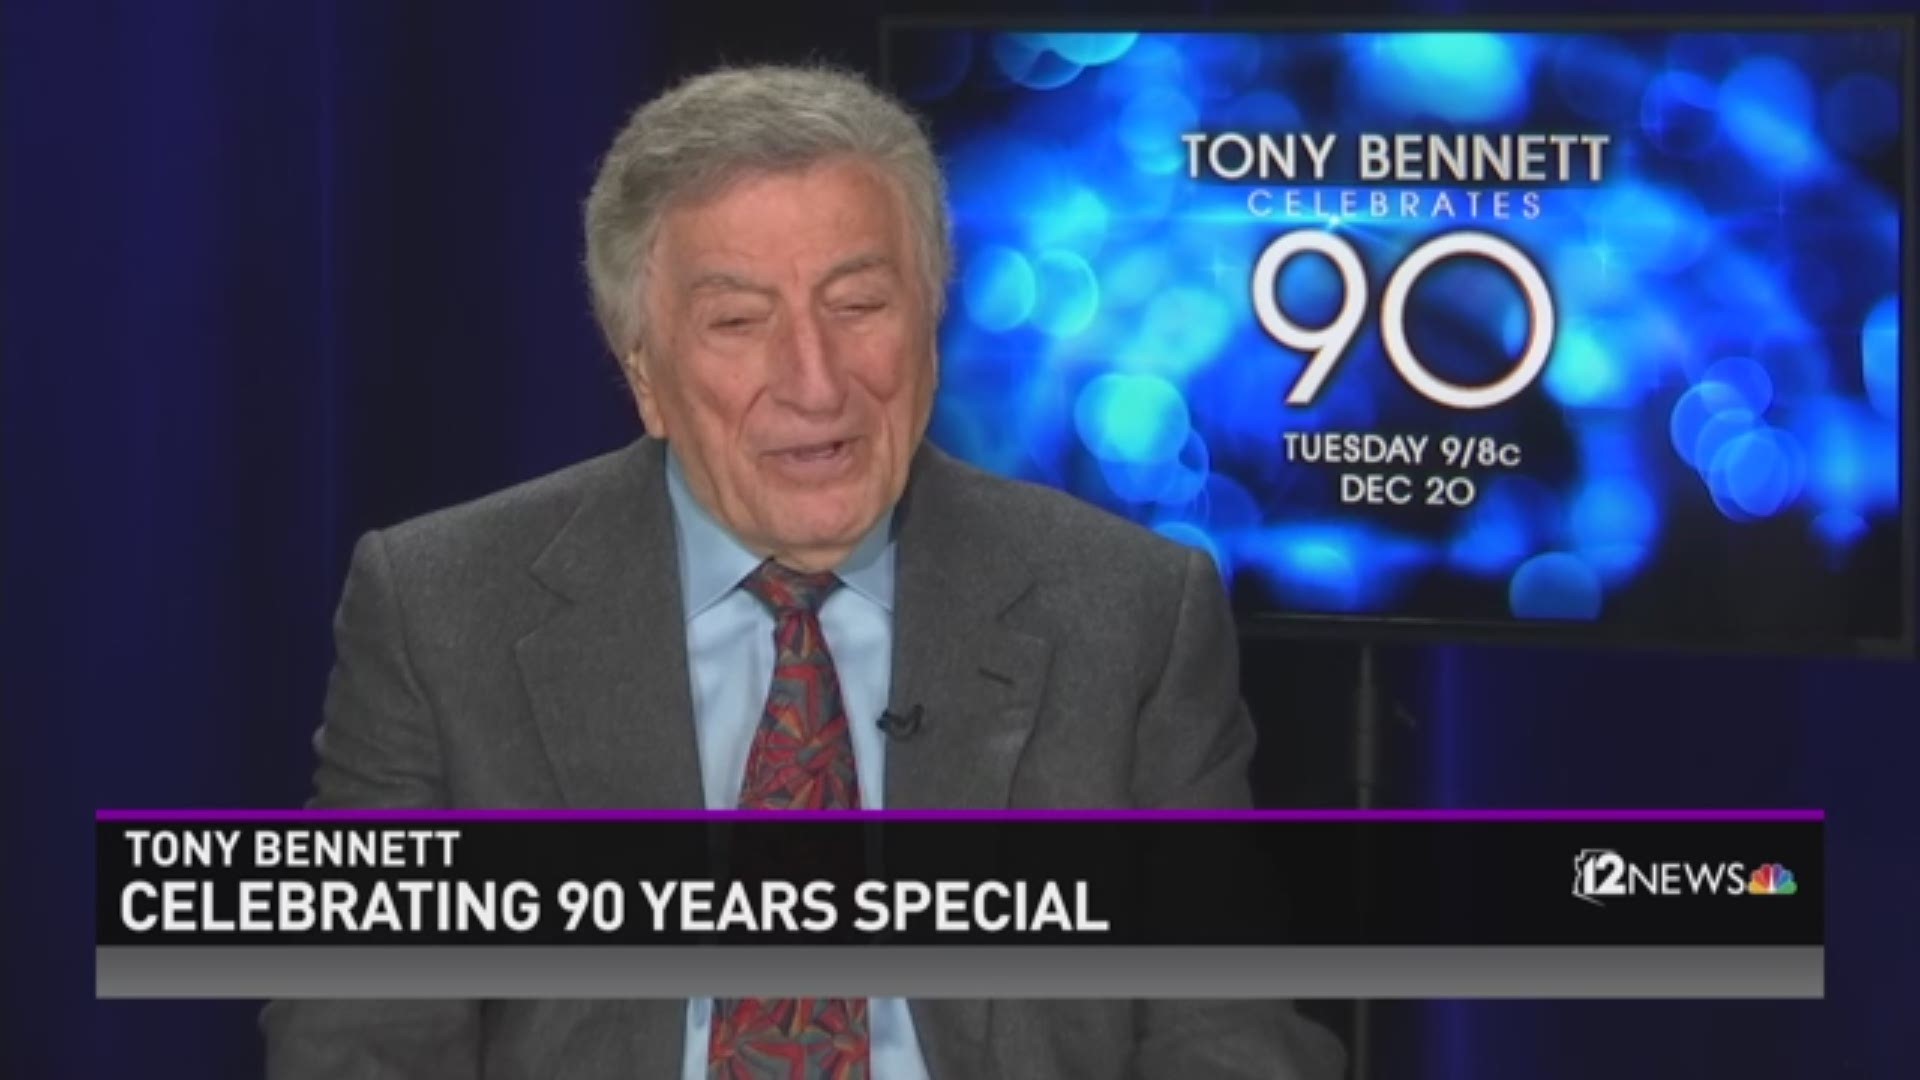 Tony Bennett shares his secret to a lifetime in show business